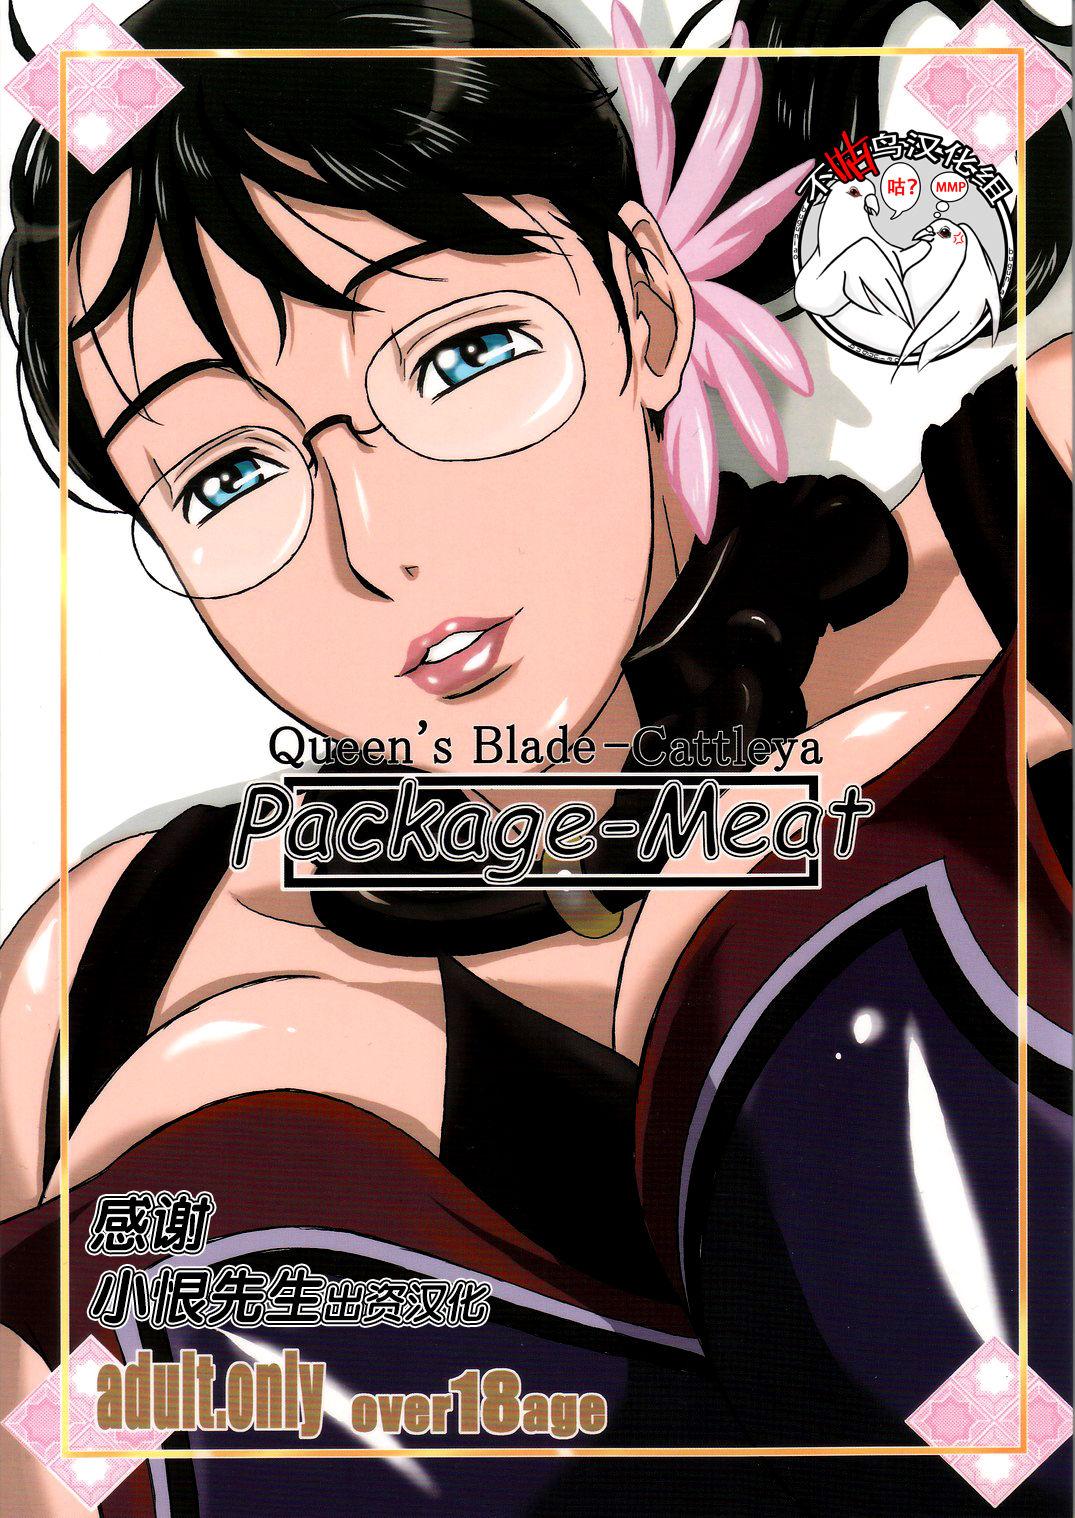 Indonesia (C72) [Shiawase Pullin Dou (Ninroku)] Package Meat (Queen's Blade) [Chinese] amateur coloring version - Queens blade Young Old - Picture 1